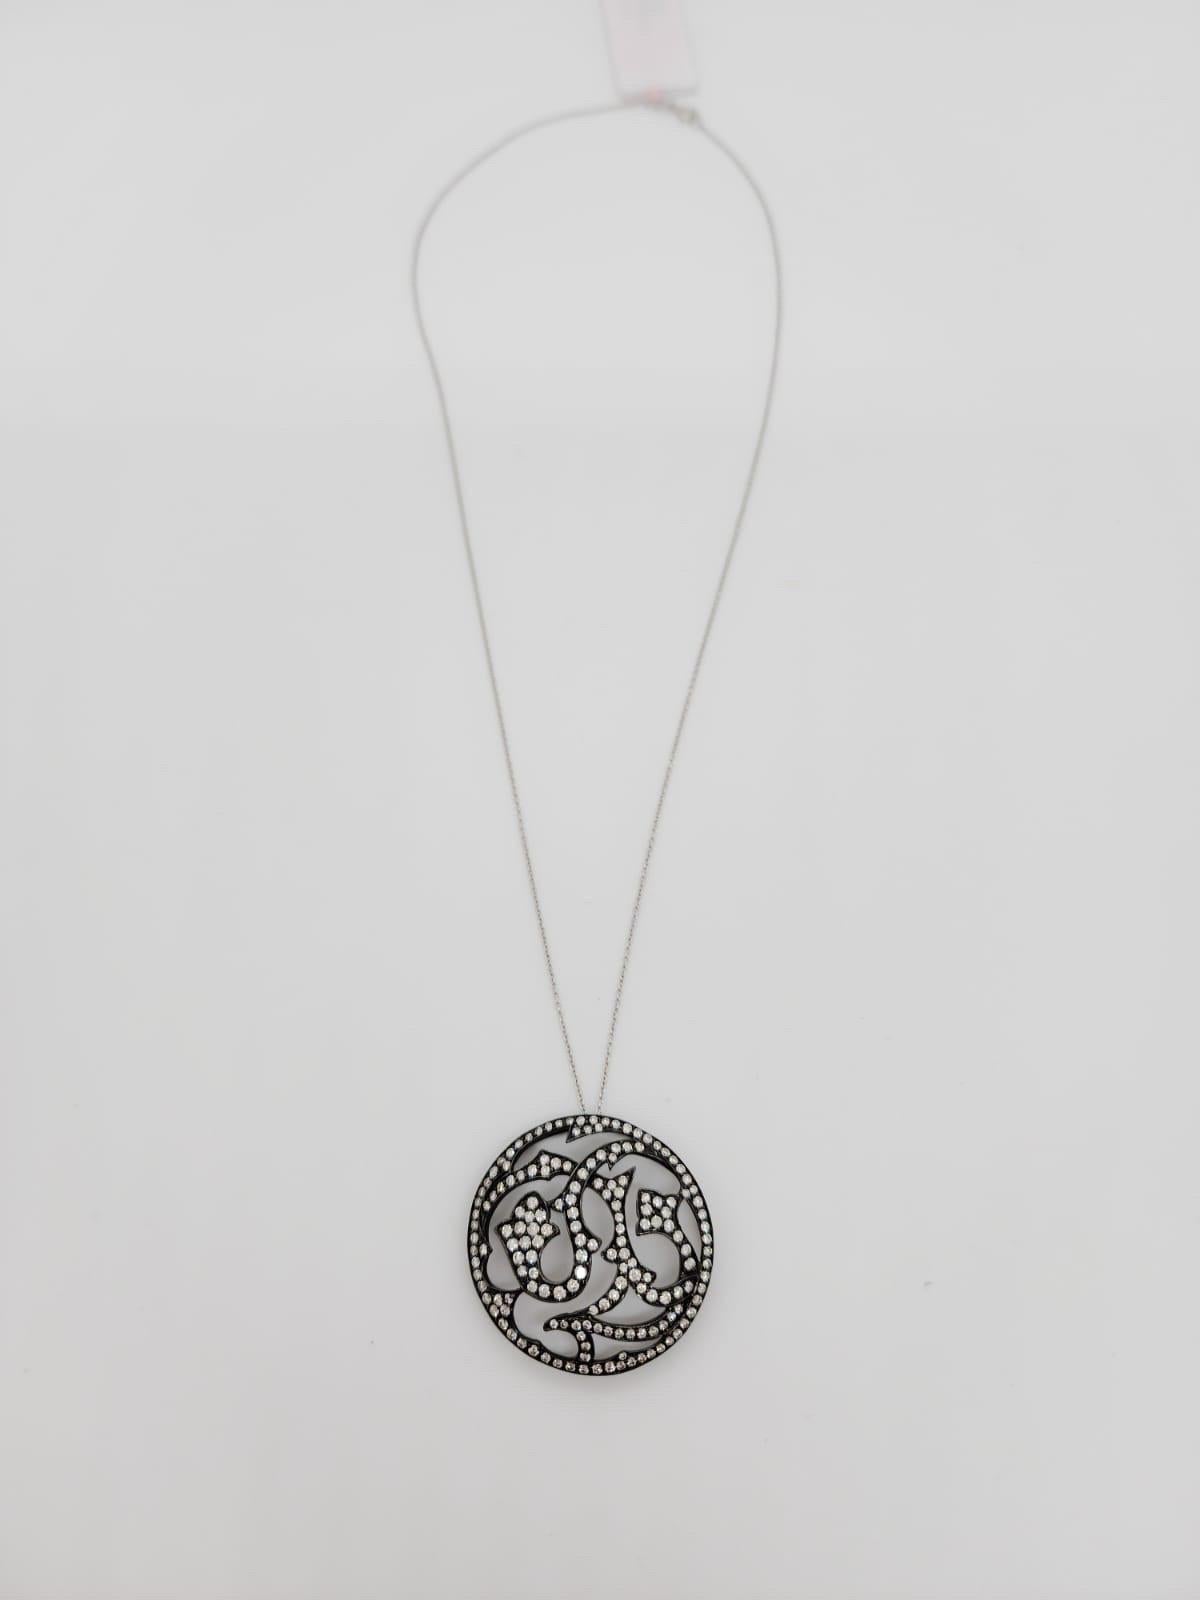 Beautiful 2.13 ct. white diamond rounds in this medallion pendant.  Handmade in 18k white gold with black rhodium.  Length is 18